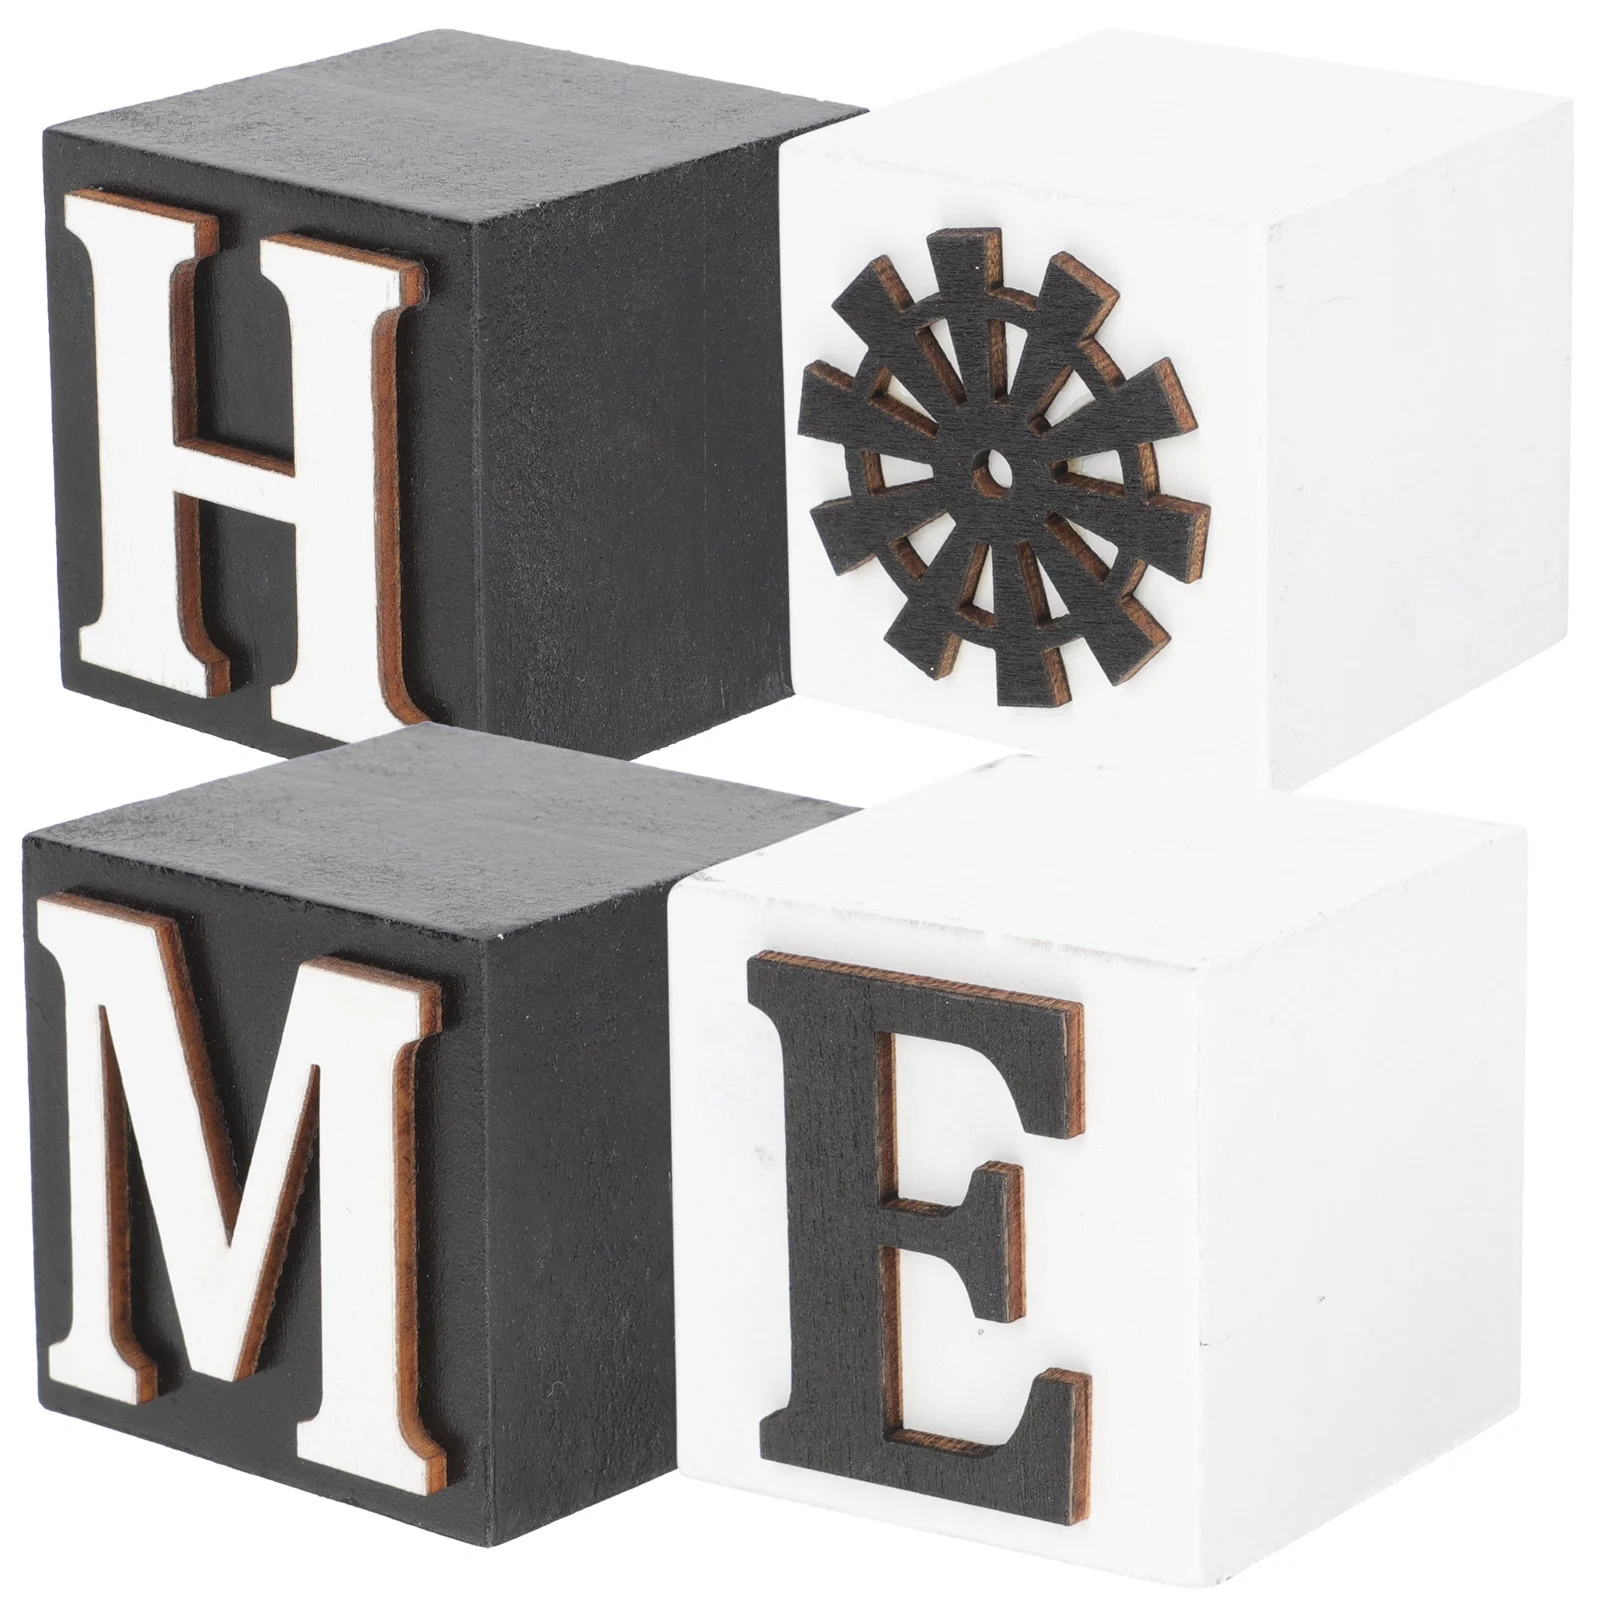 

Home Block Signs Sign Farmhouse Word Rustic Letter Tiered Tray Blocks Freestanding Decor Box Tabletop Wooden Decorations Free